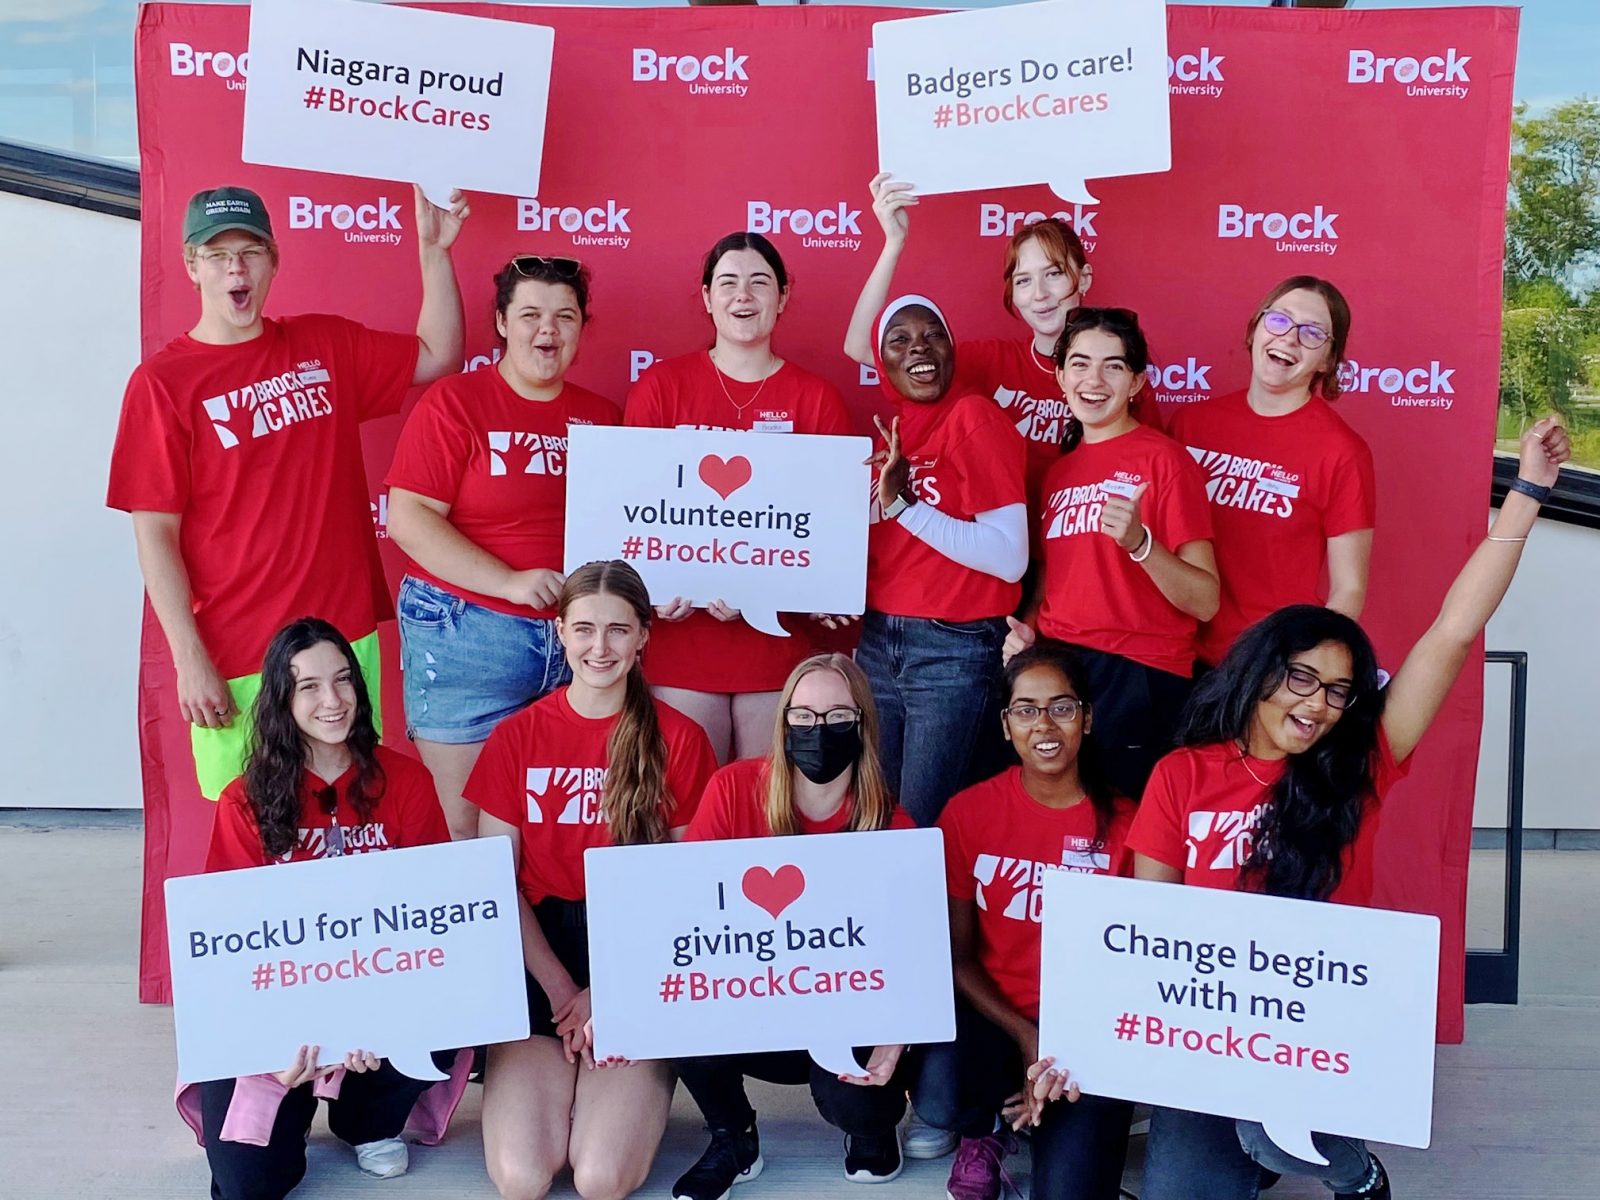 A group of 12 students wearing Brock Cares t-shirts hold signs with Brock Cares messages.